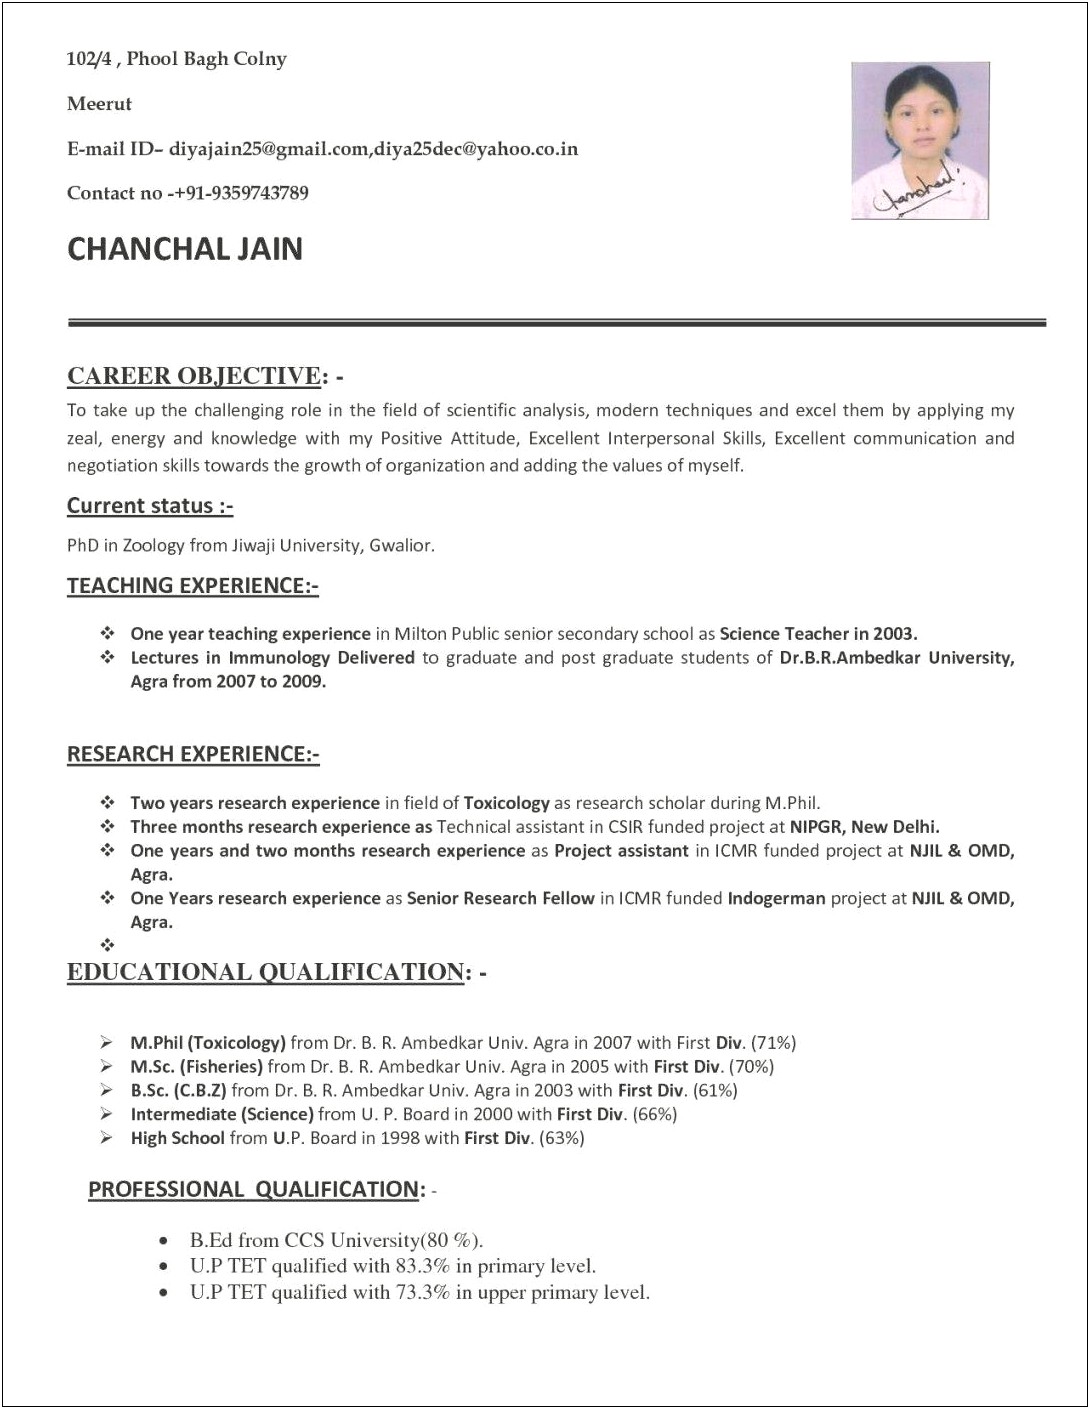 Resume Career Objective For Applied Physical Science